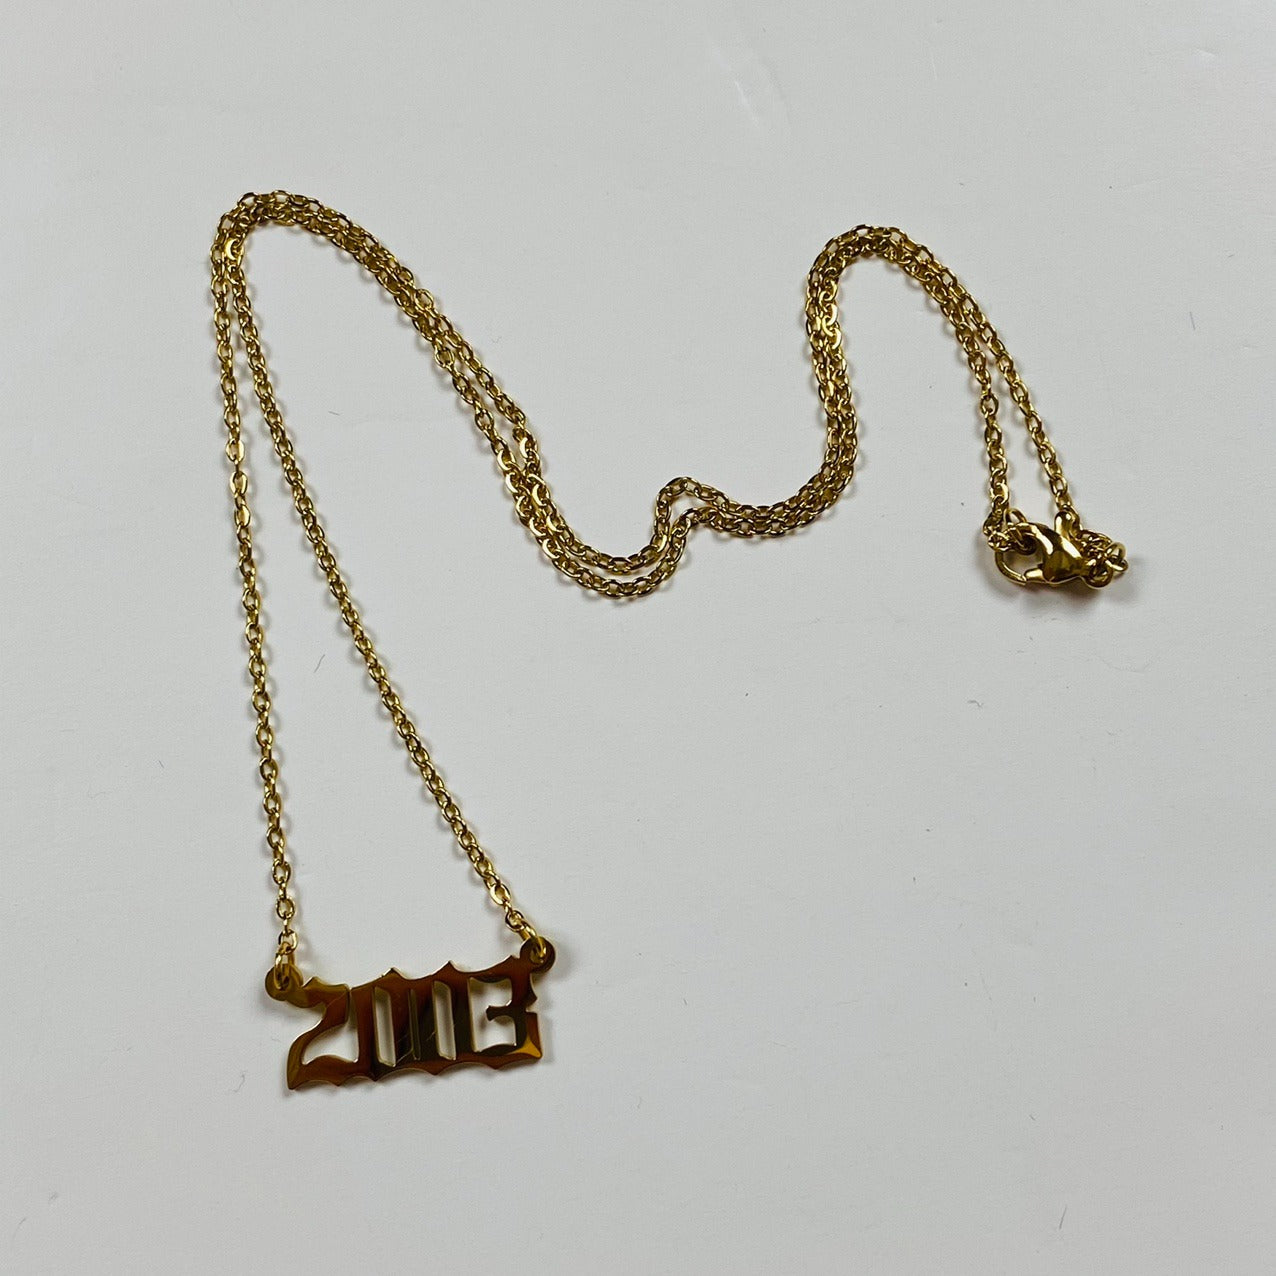 2003 Birth Year Necklace Chain Gold